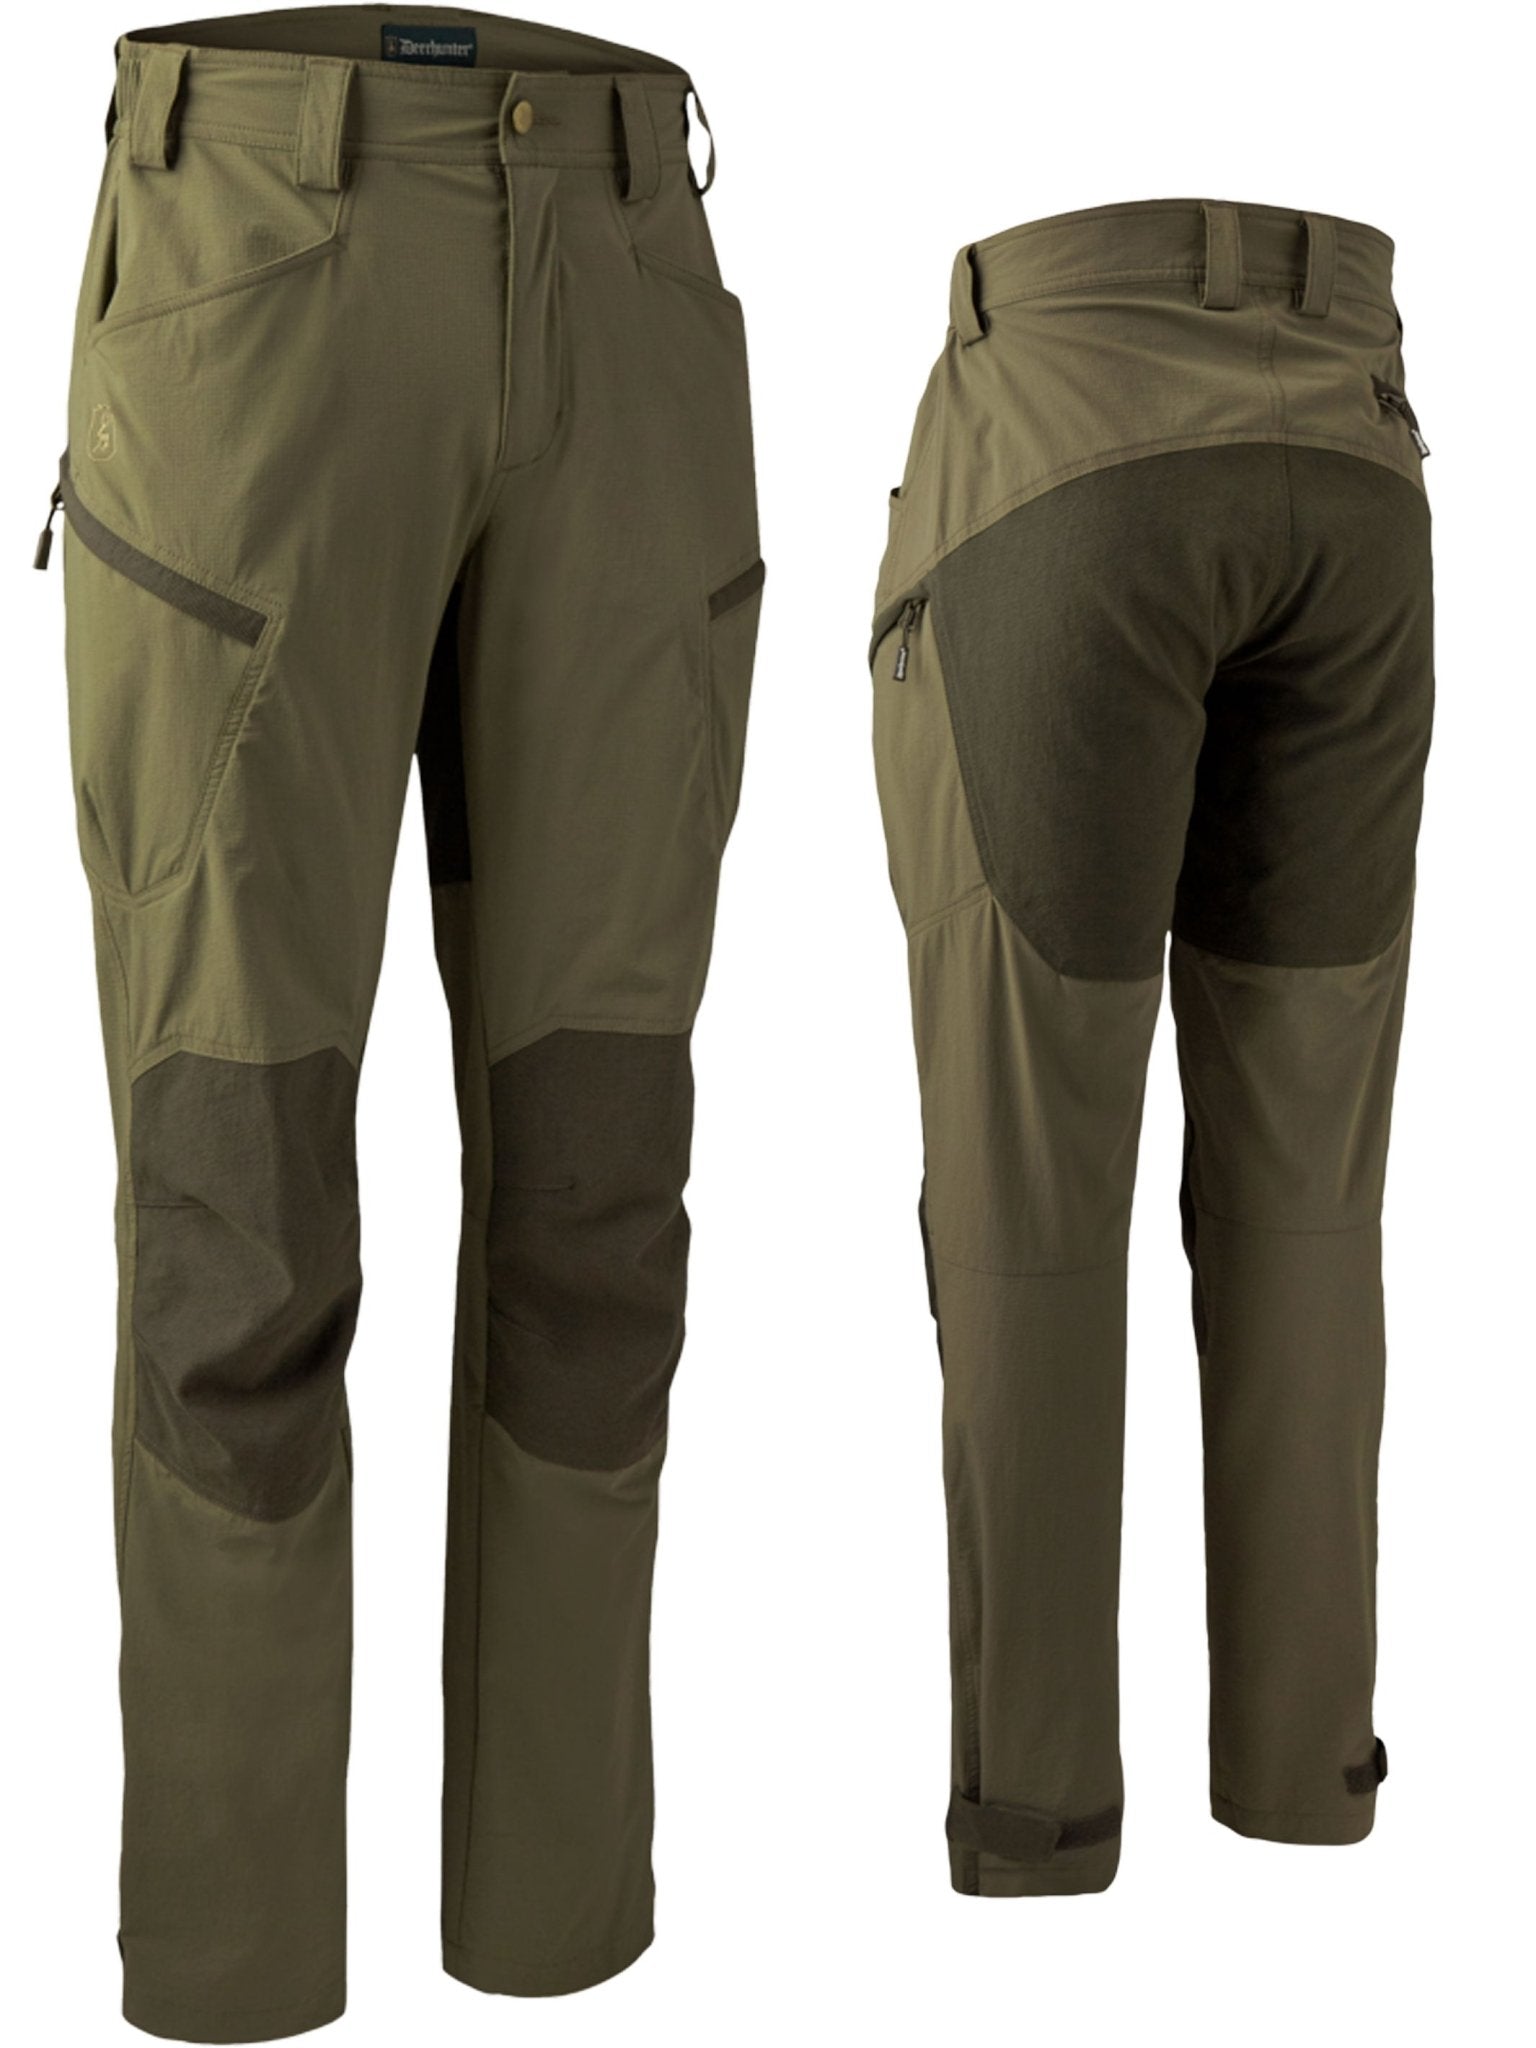 4elementsclothingDeerhunterDeerhunter - Anti Insect Trousers with HHL treatment - Water repellent & BreathableTrousers & Jeans3883-326-48